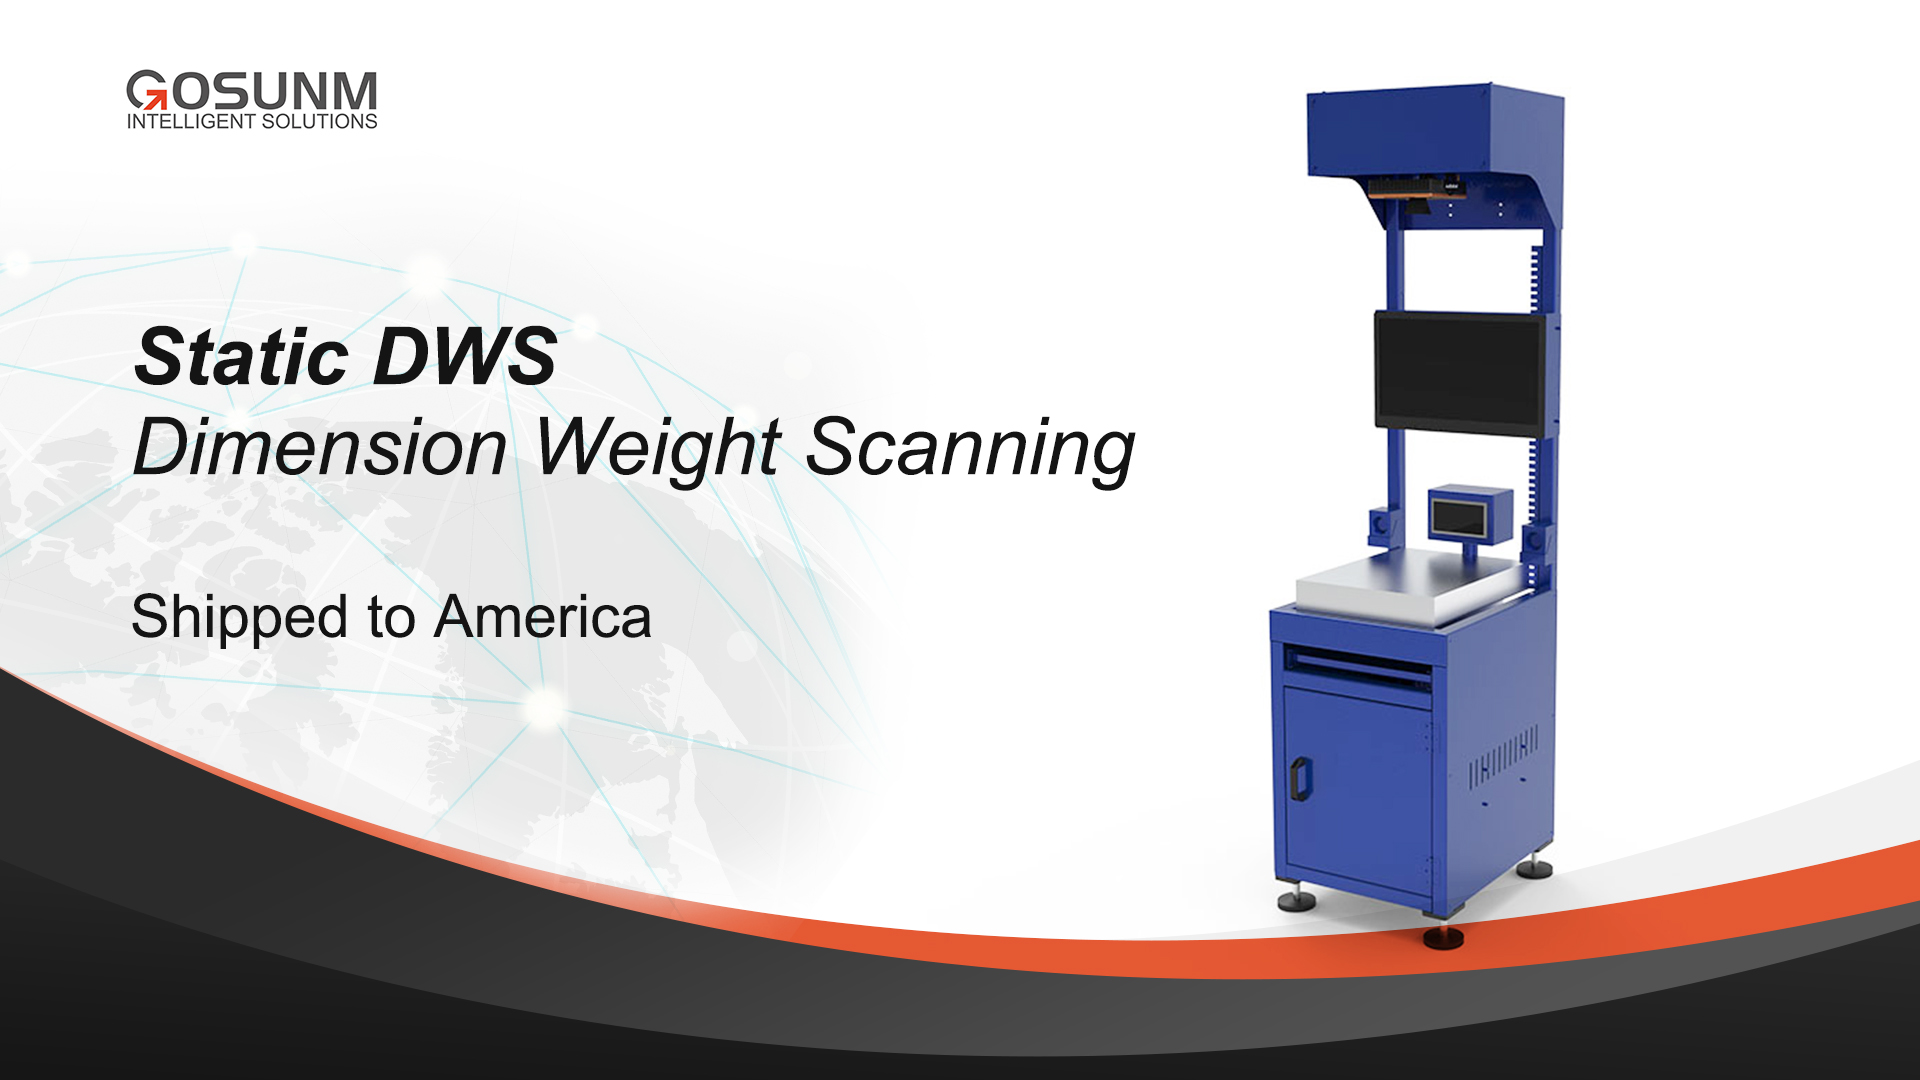 Stastic DWS（Dimension Weight Scanning）Shipped To America